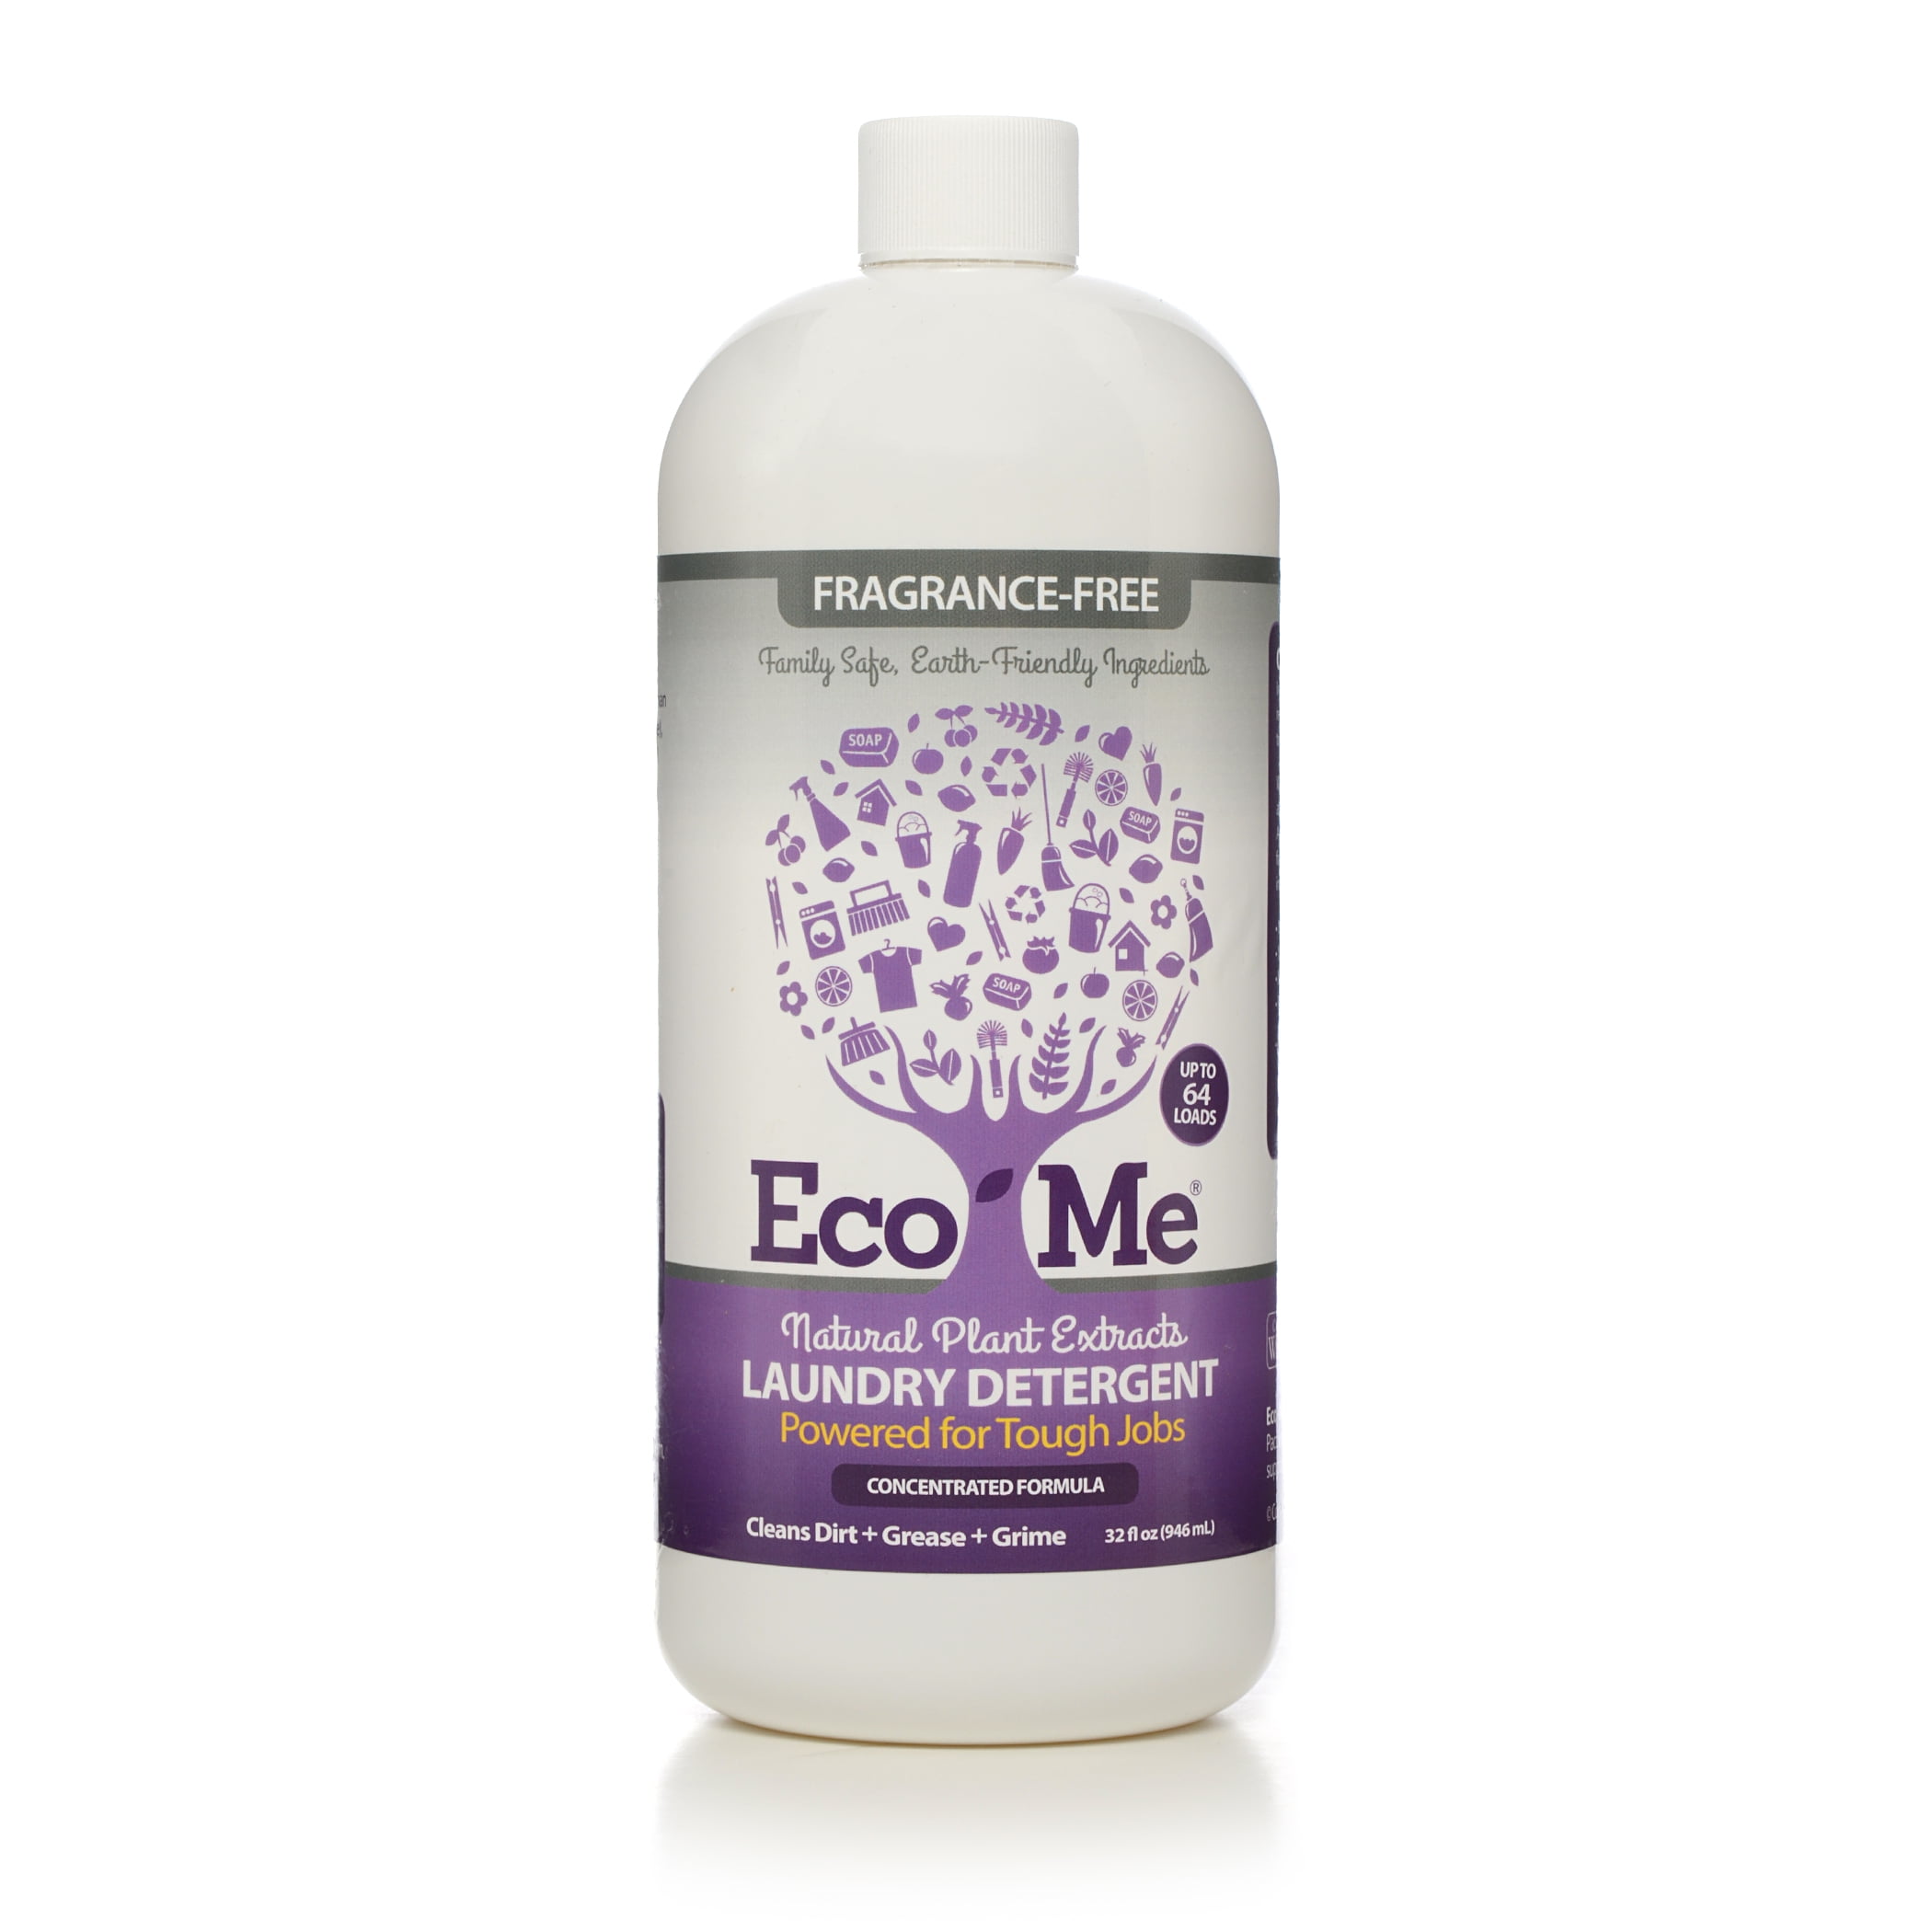 Eco-Me 32 oz Fragrance-Free Laundry Detergent, Pack of 6